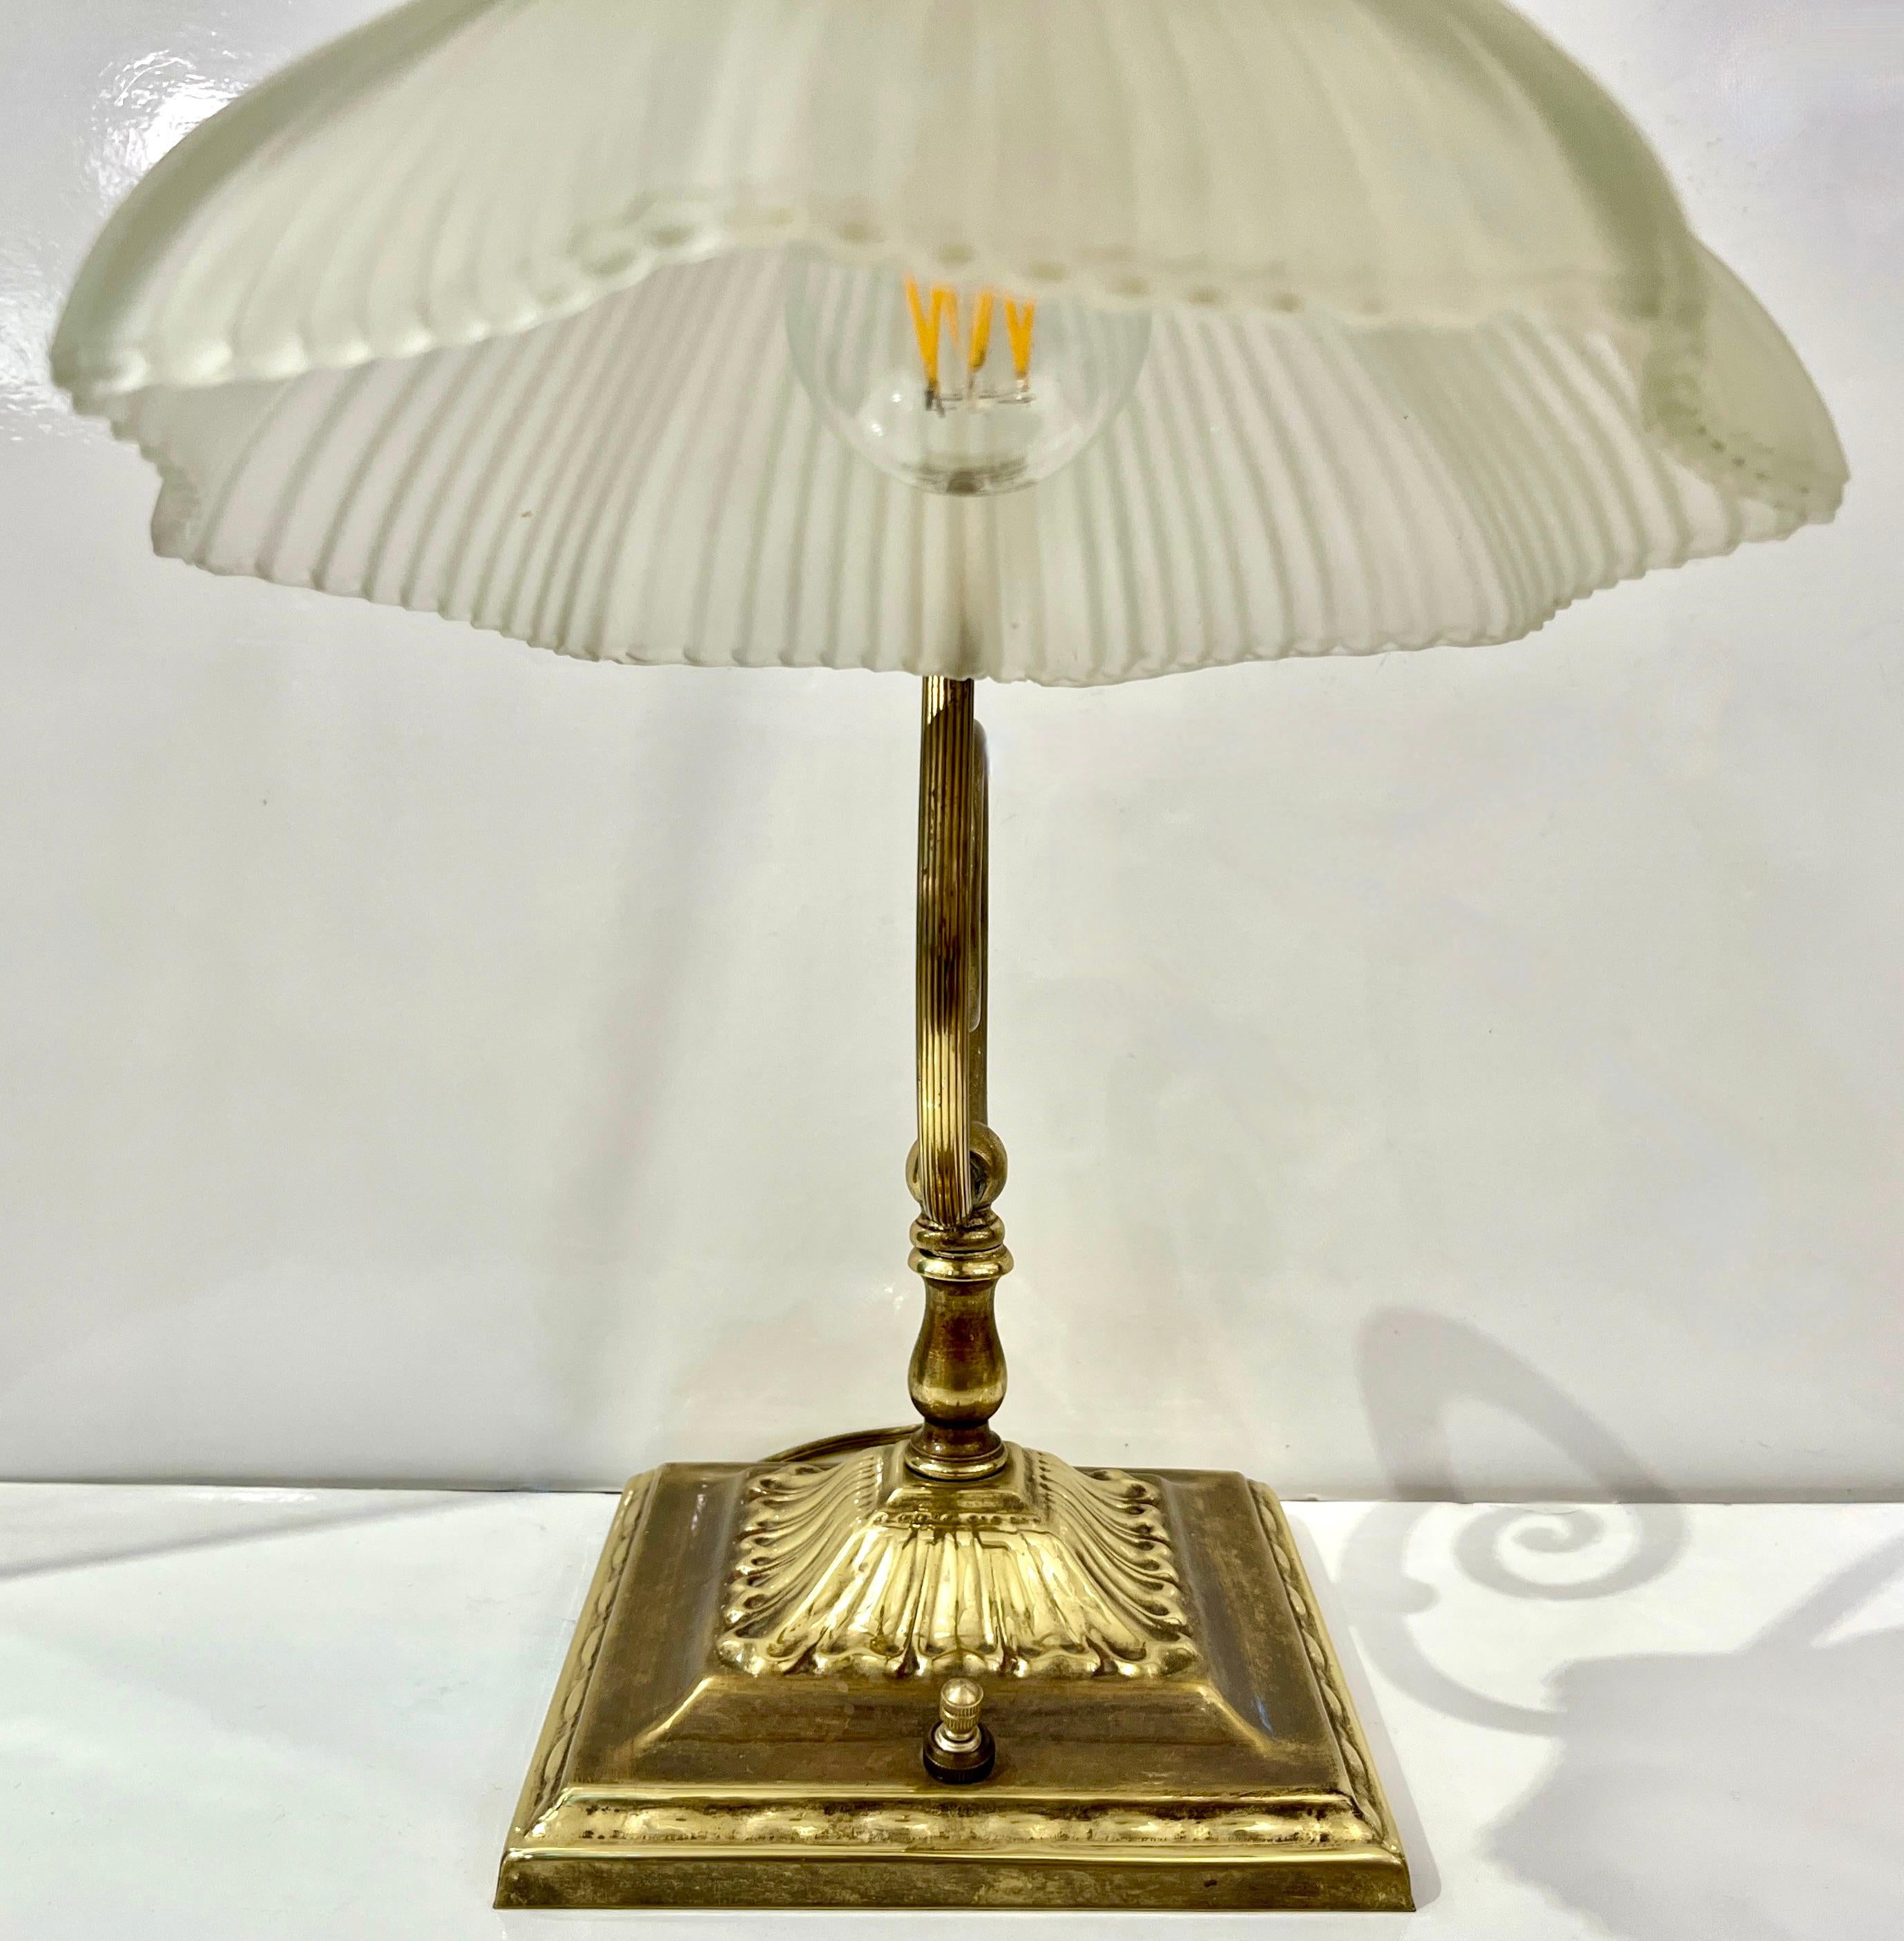 1950s American Art Deco Style Brass Table/Desk Lamp with Satin White Glass Shade For Sale 7